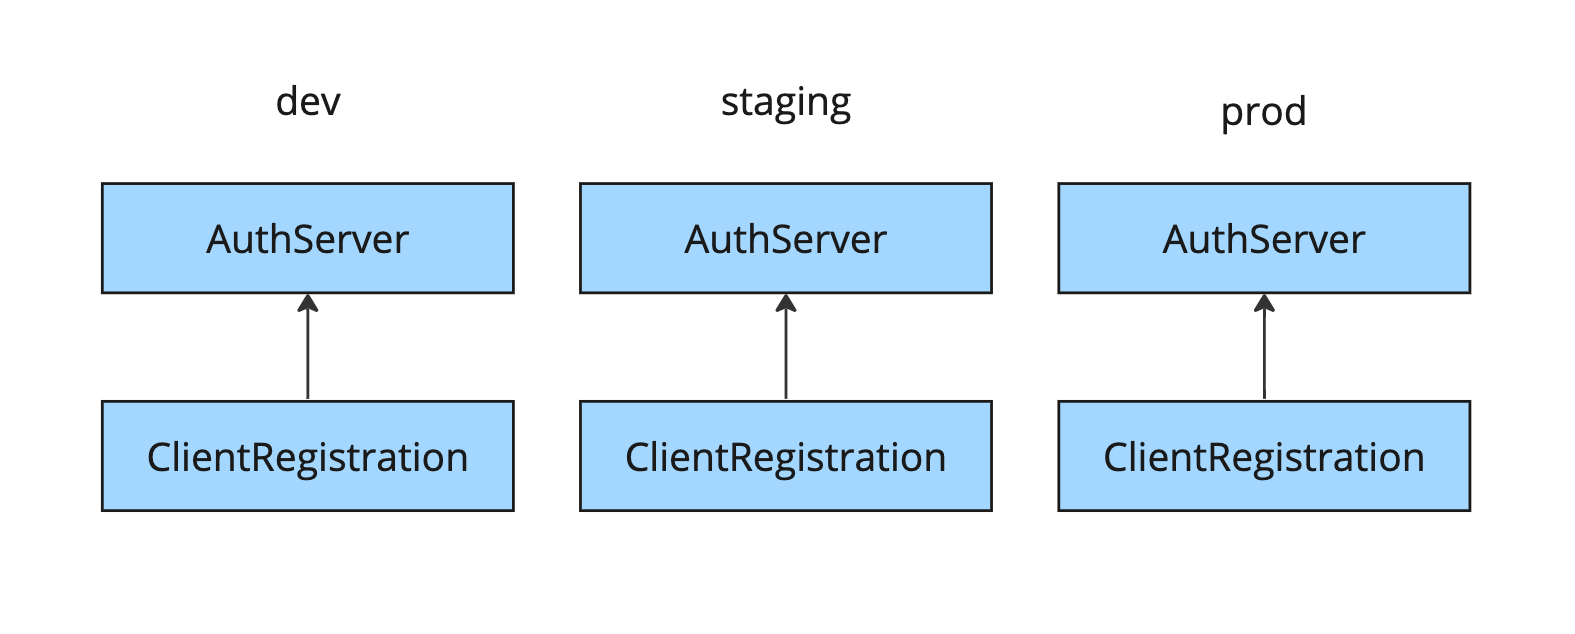 Diagram shows level 1 of AppSSO consumption with ClientRegistration.